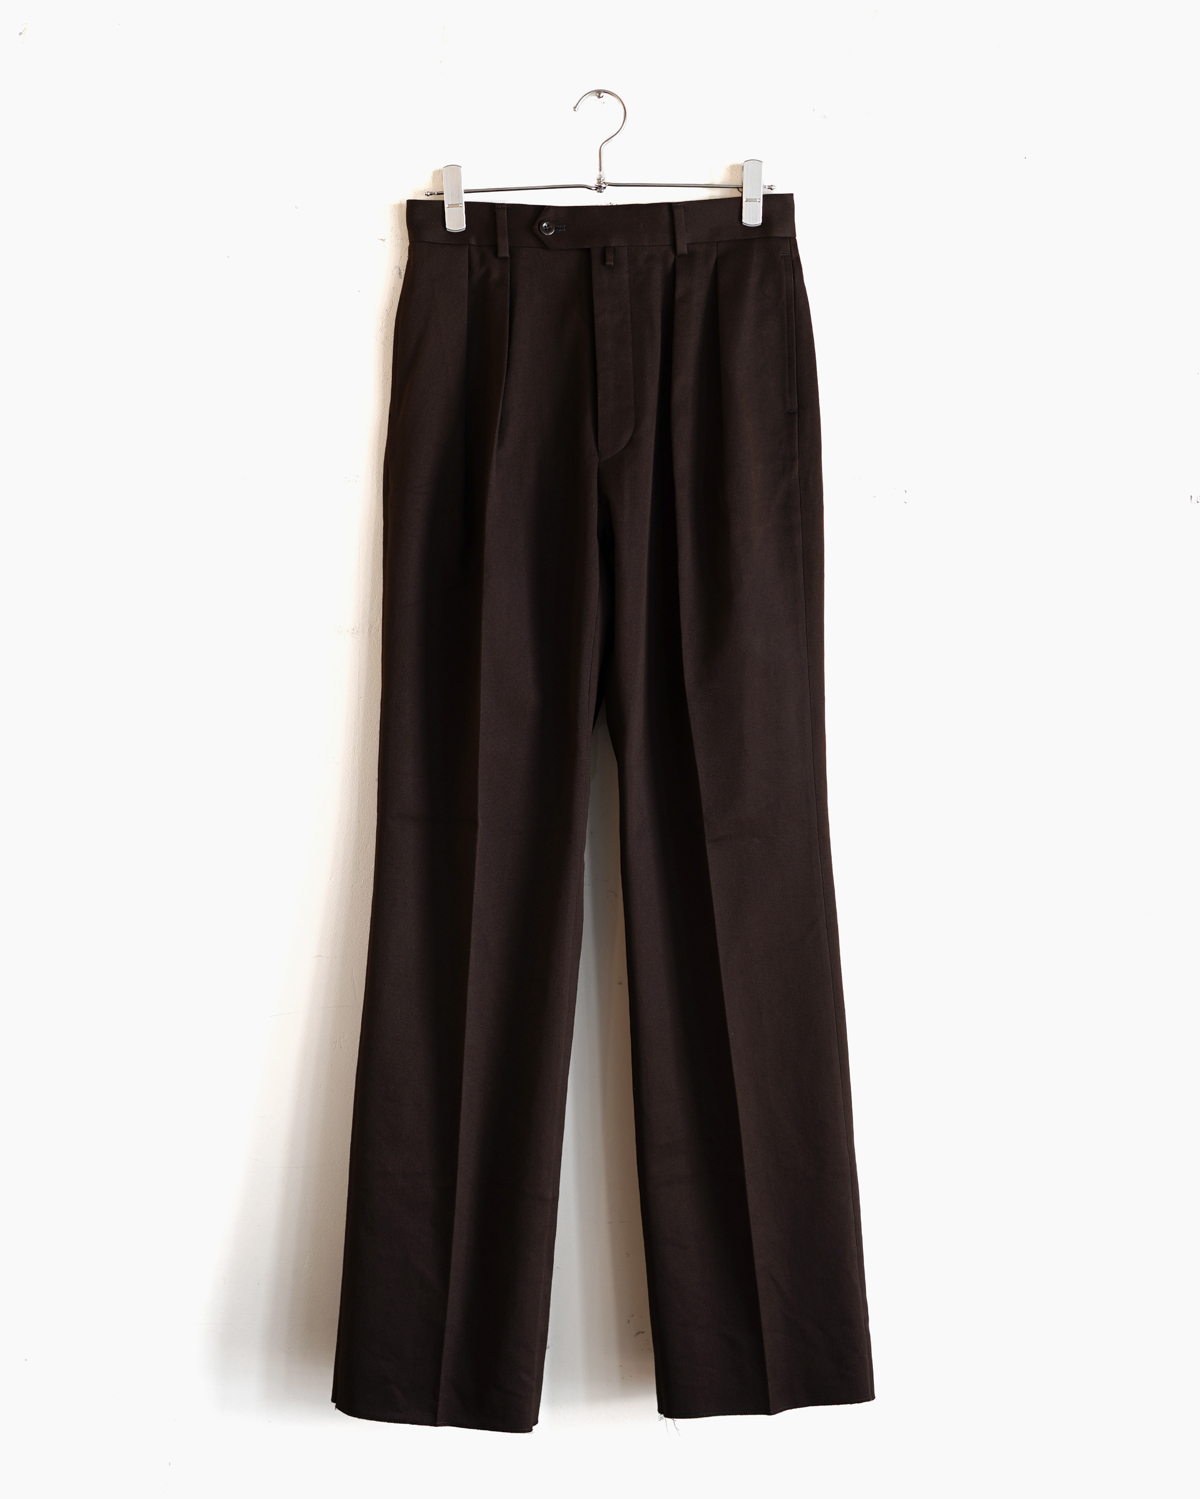 SUSTAINABLE DRILL TWILL COTTON｜WIDE TYPE Ⅰ - Brown｜NEAT